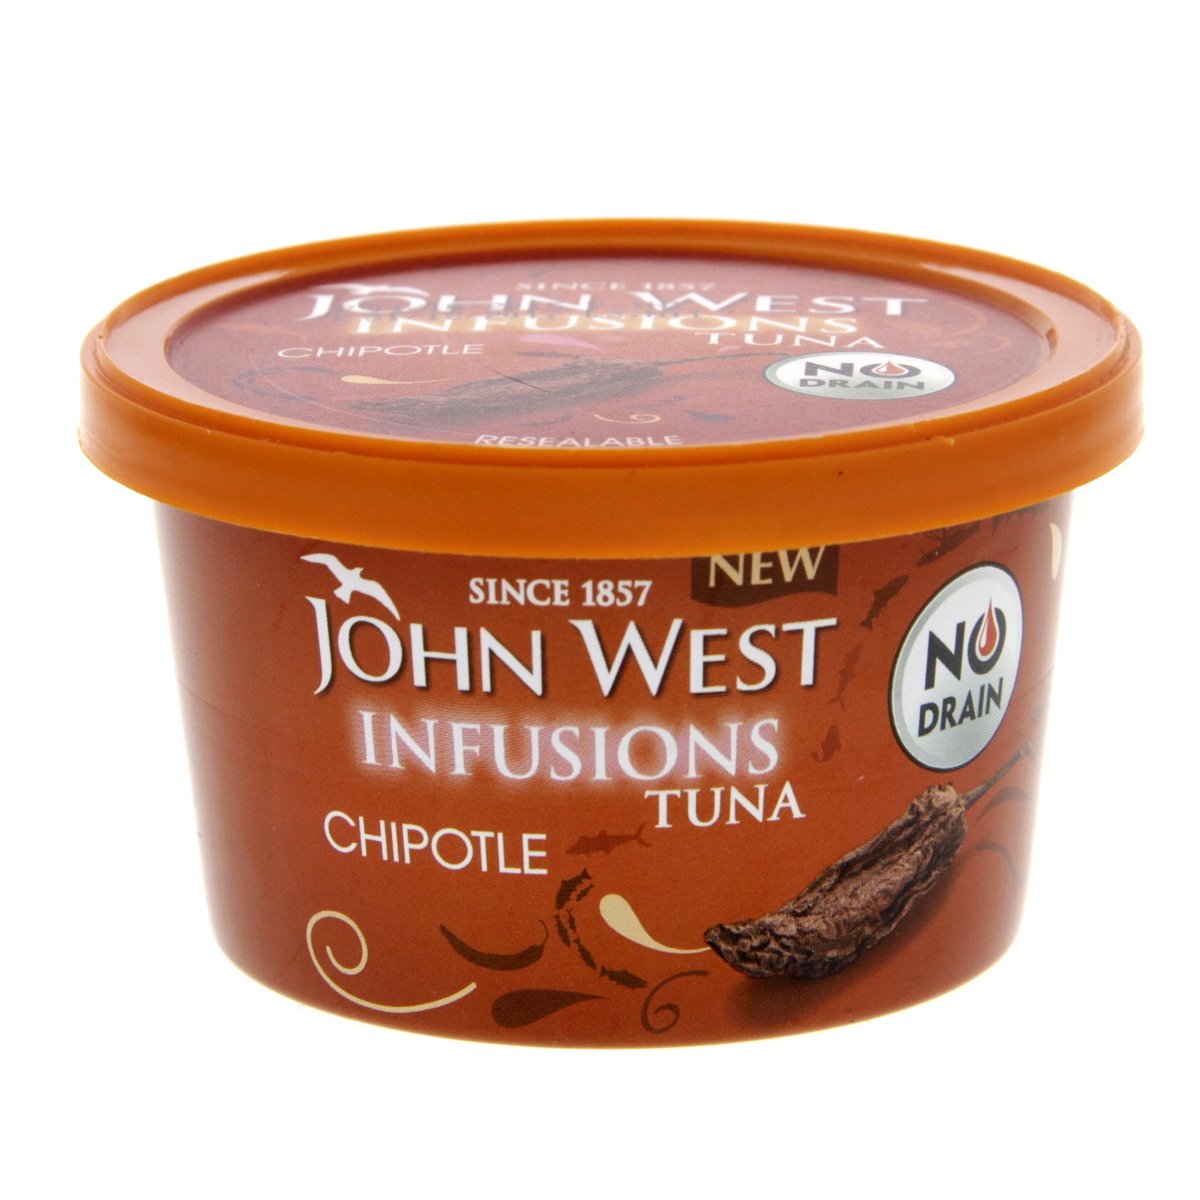 John West Infusions Tuna Chipotle 80 g